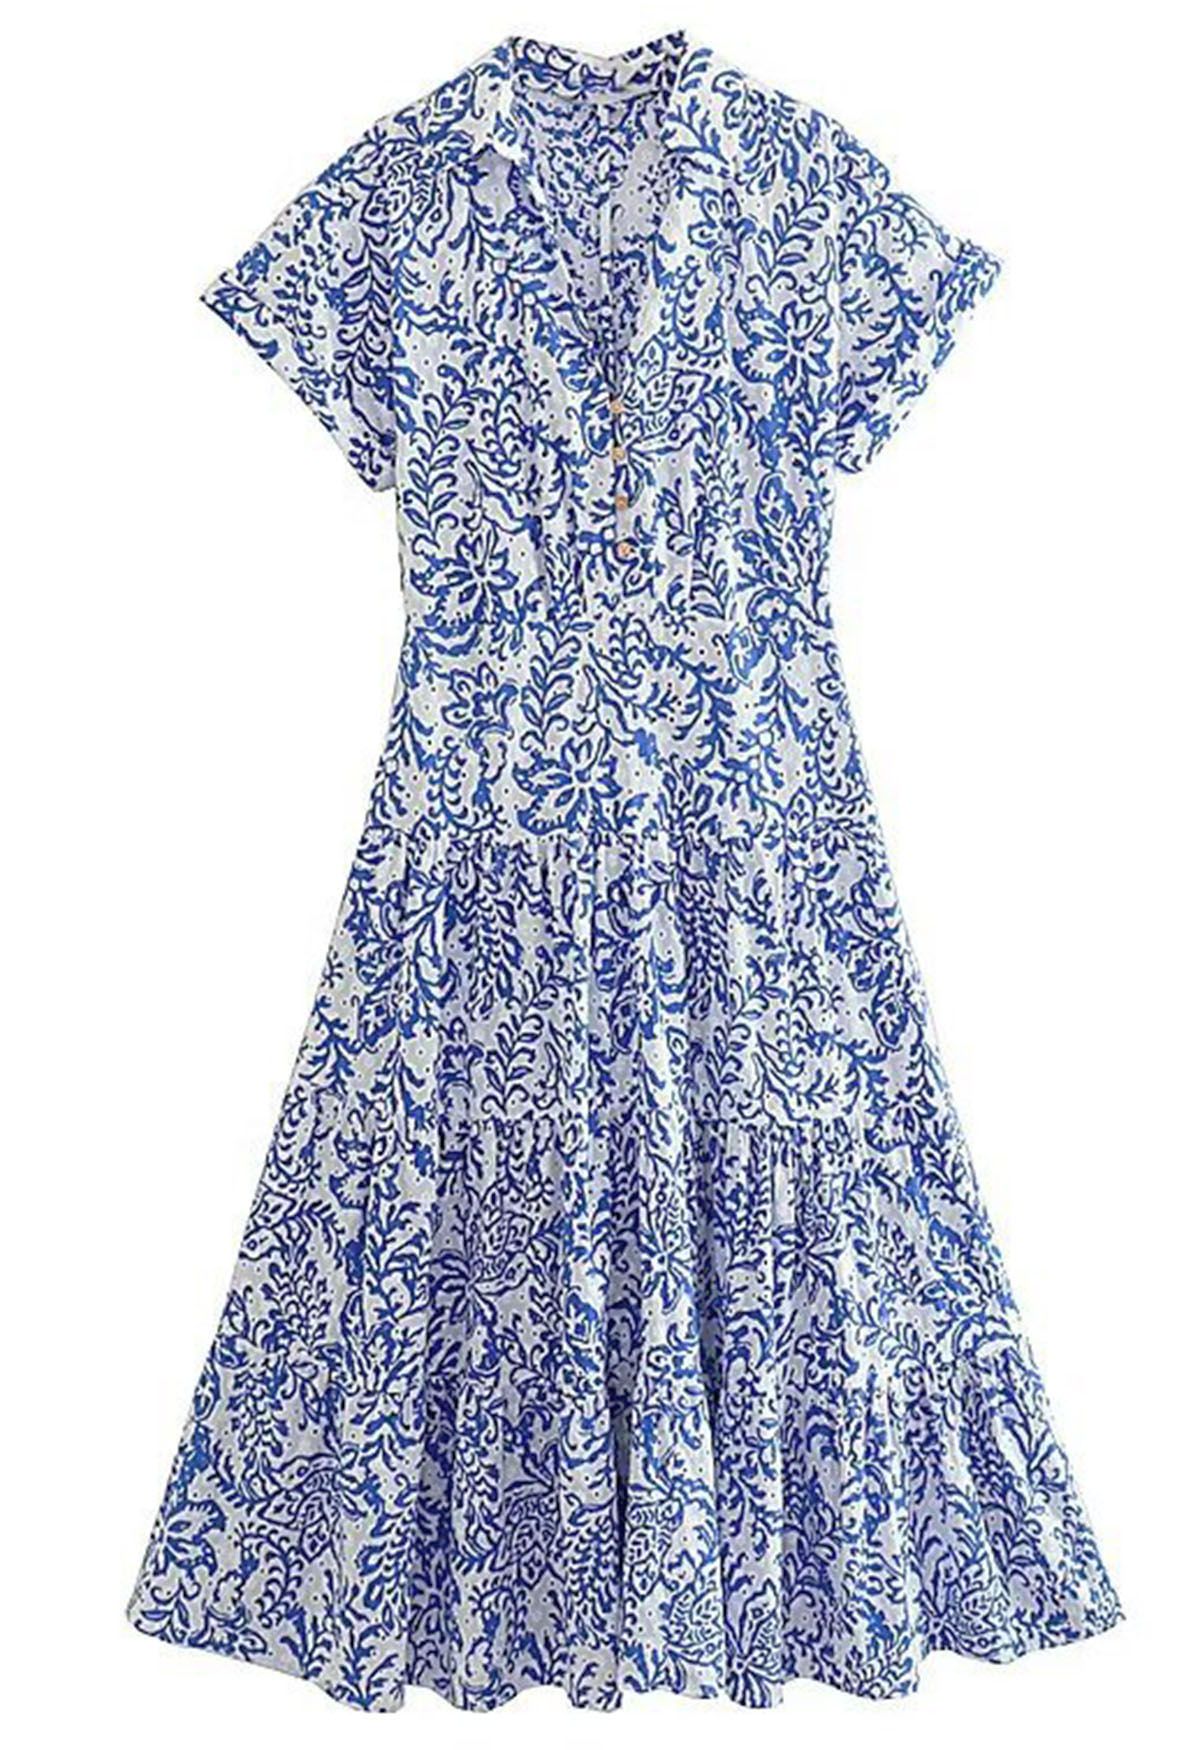 Blue Floral Cutout Back Eyelet Embroidery Dress - Retro, Indie and ...